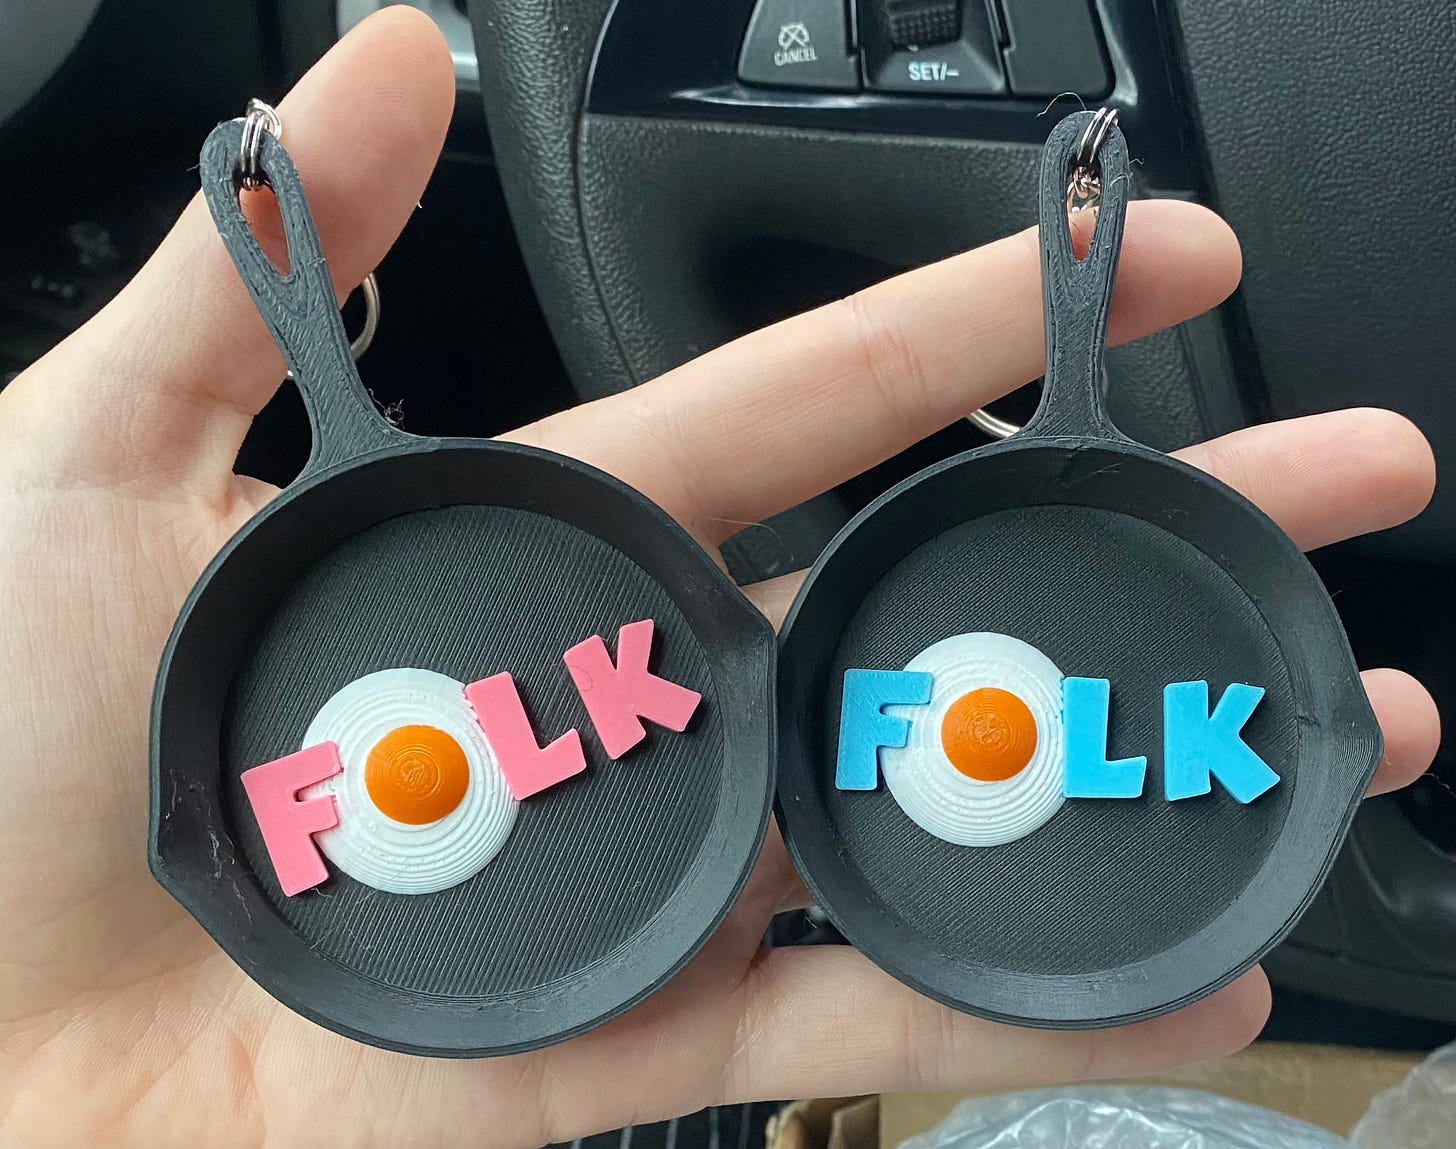 Shady's hand holding two mini 3D printed cast iron keychains with "FOLK" written inside them. The "O" is an egg.